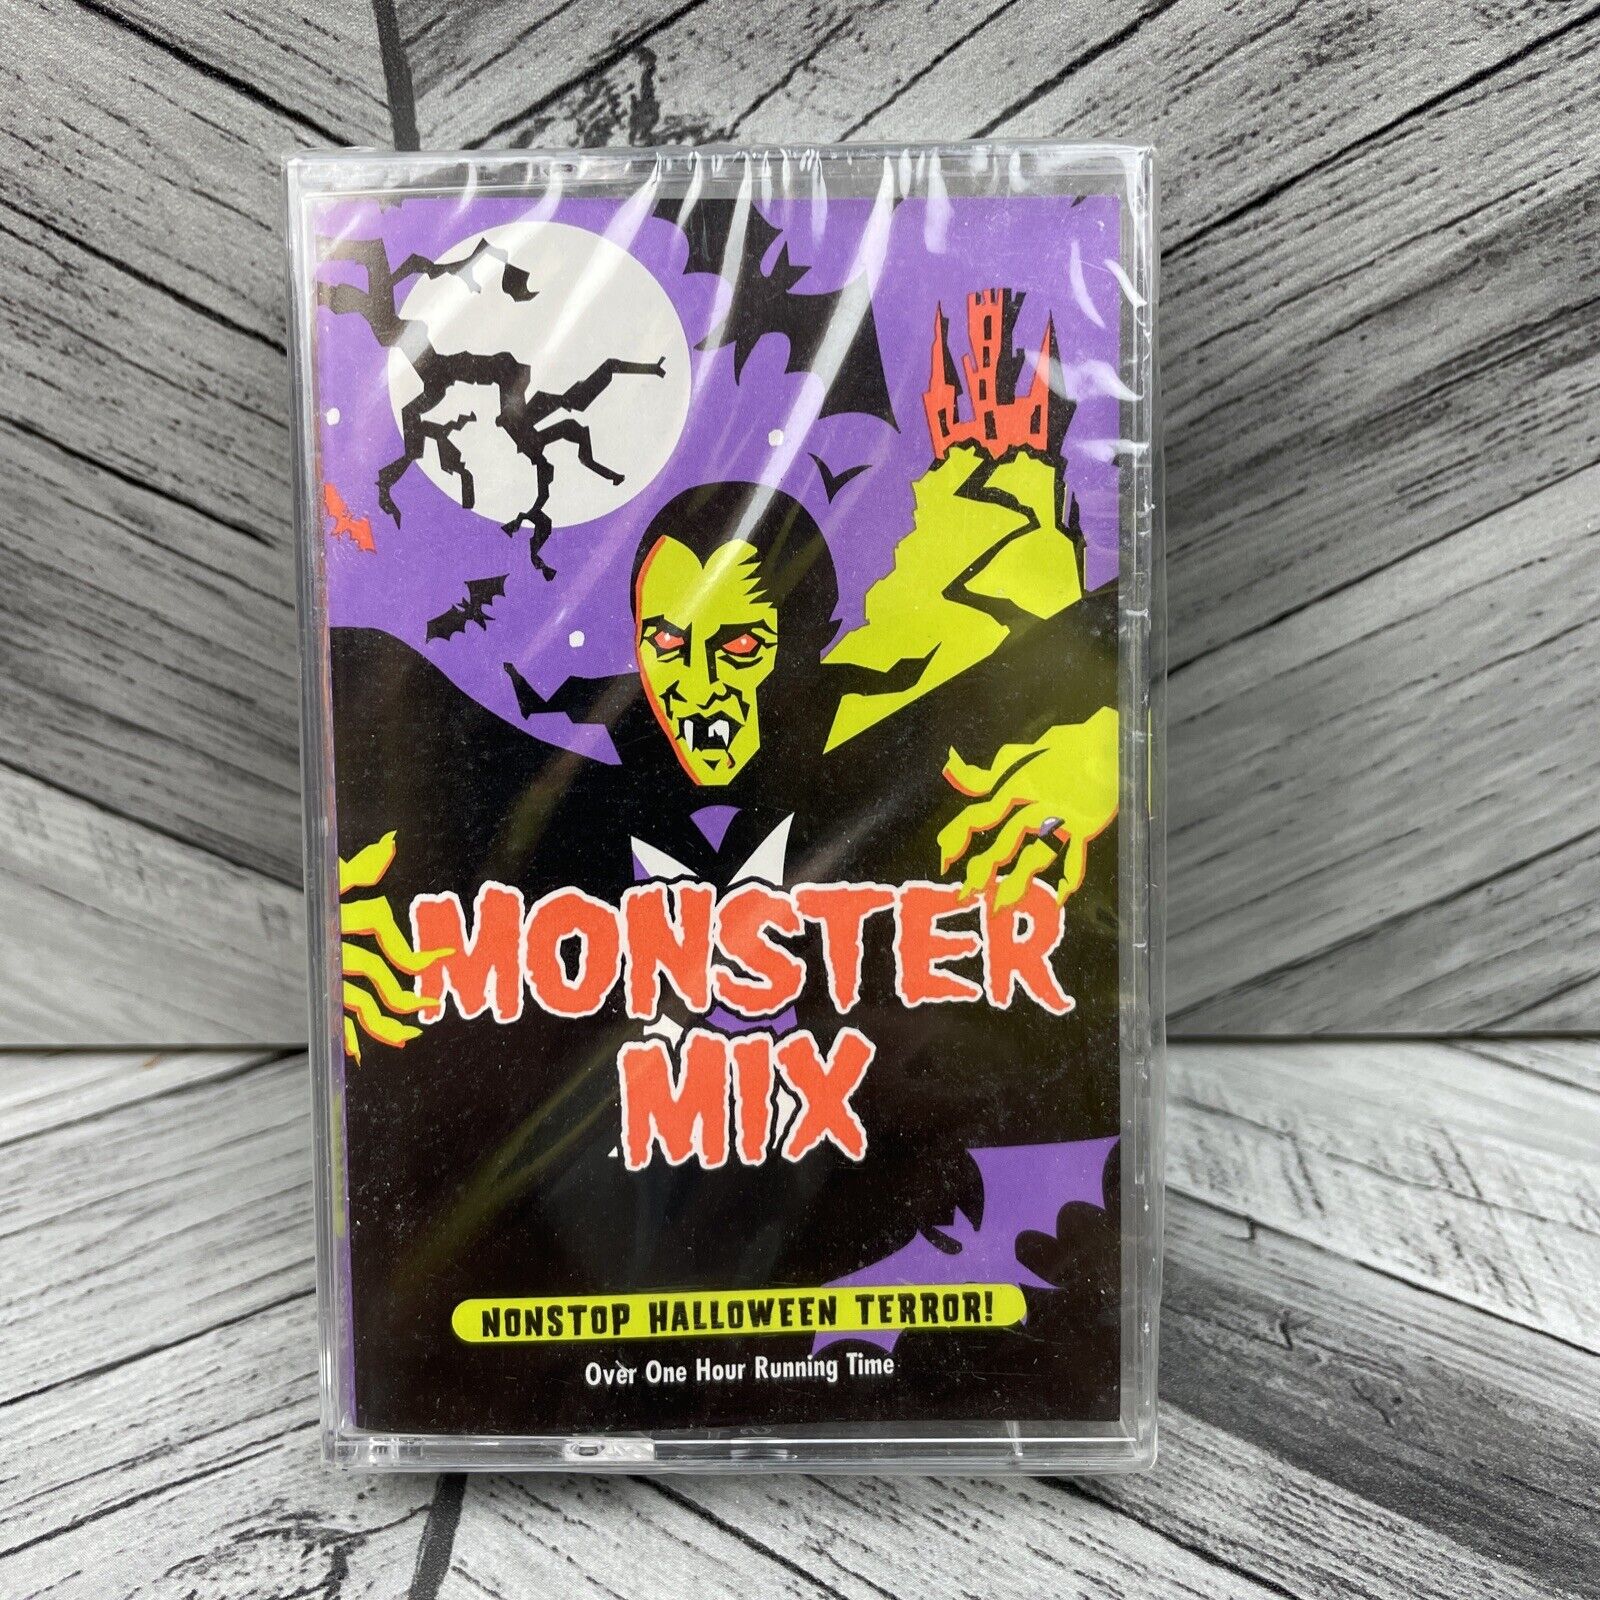 Vintage 1997 NEW Sealed Monster Mix Cassette Tape Halloween Party Ghosts Demon